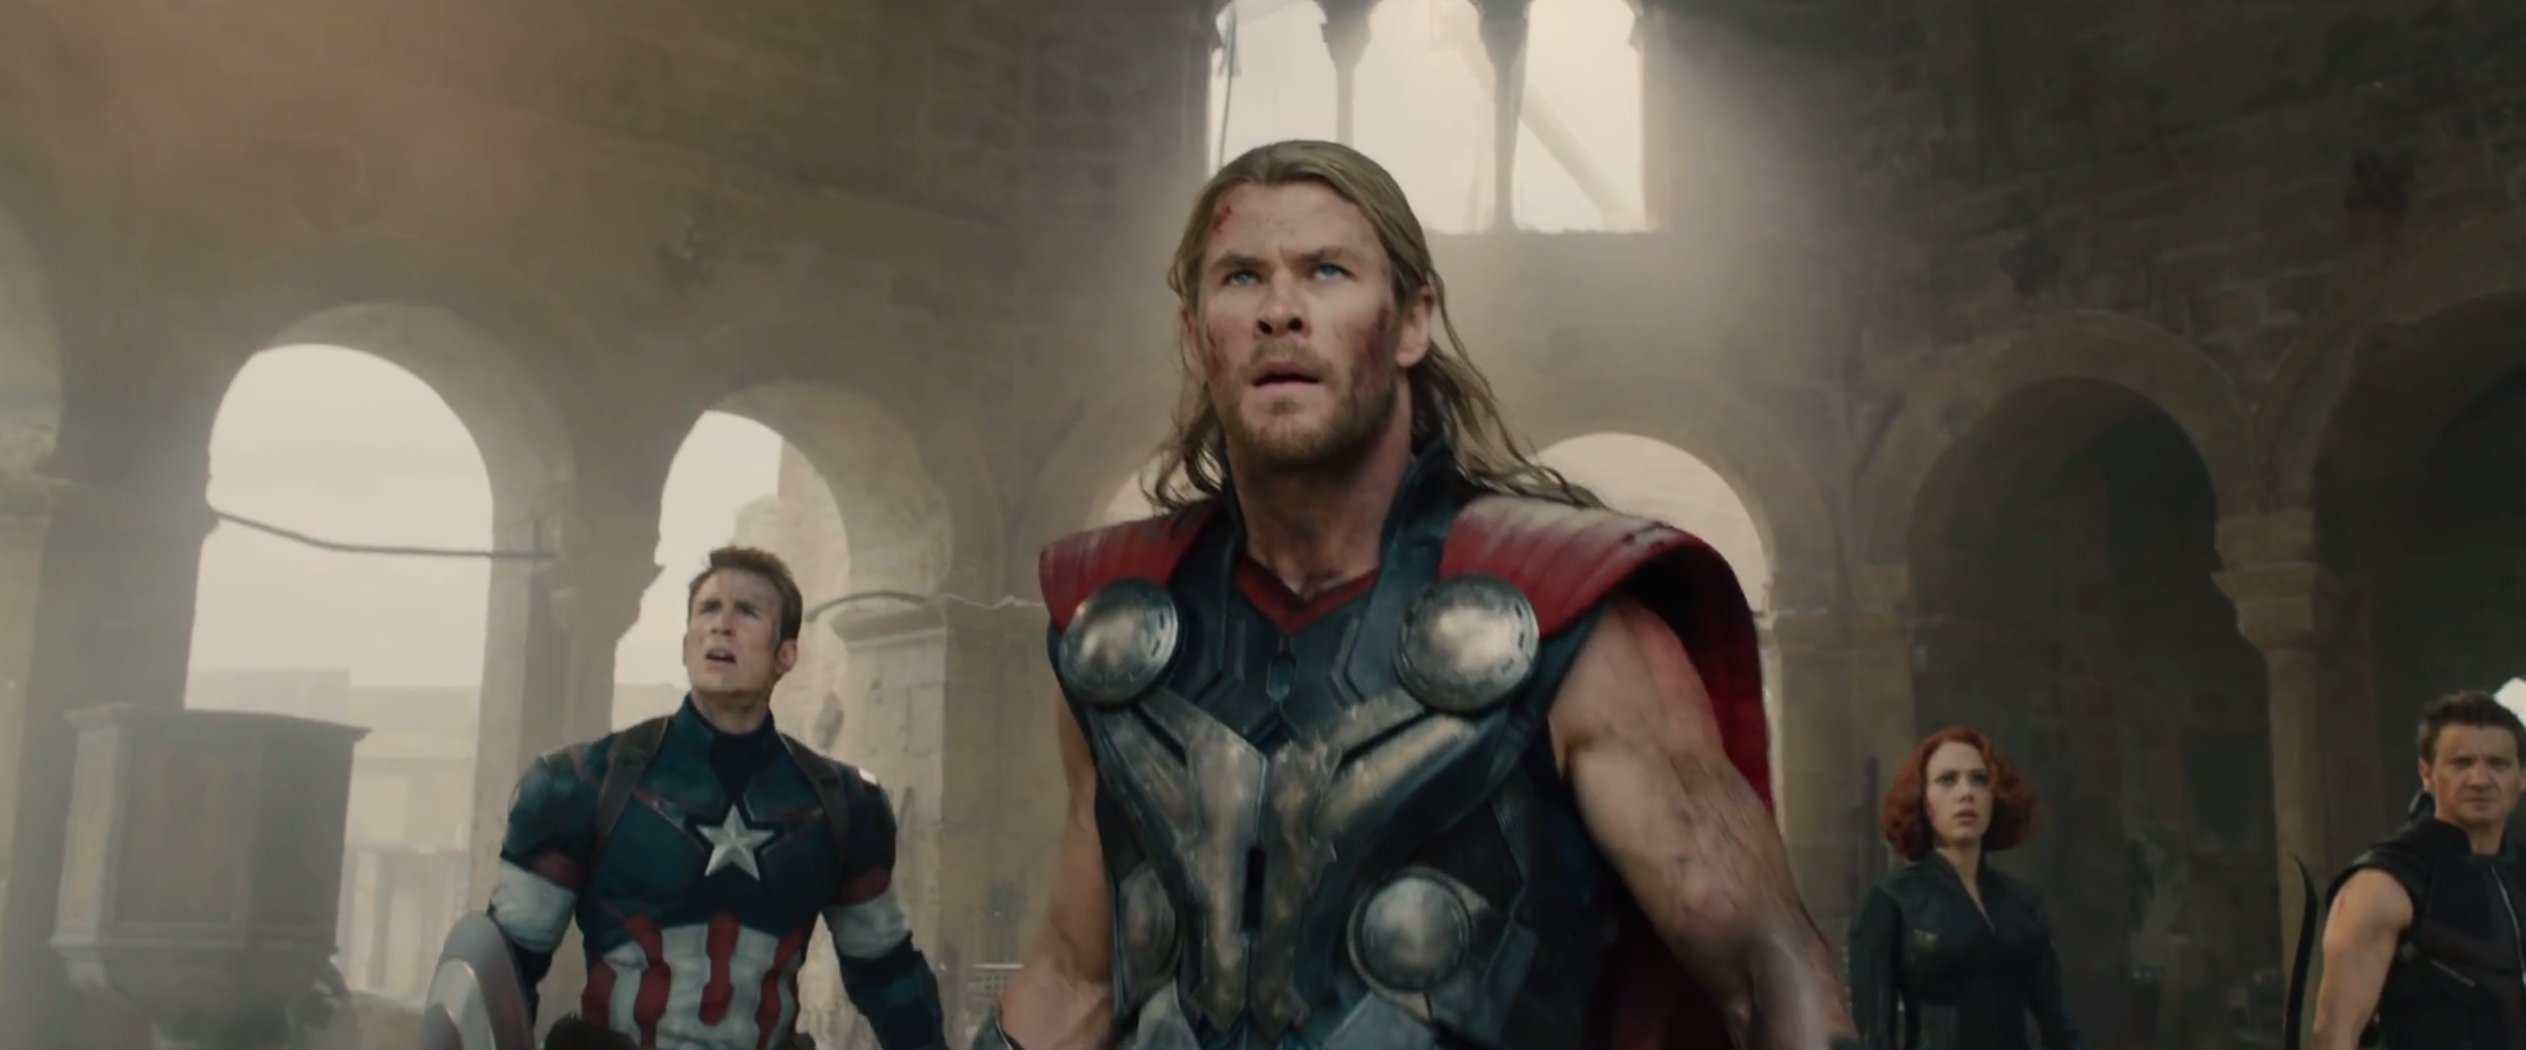 Avengers: Age of Ultron instaling